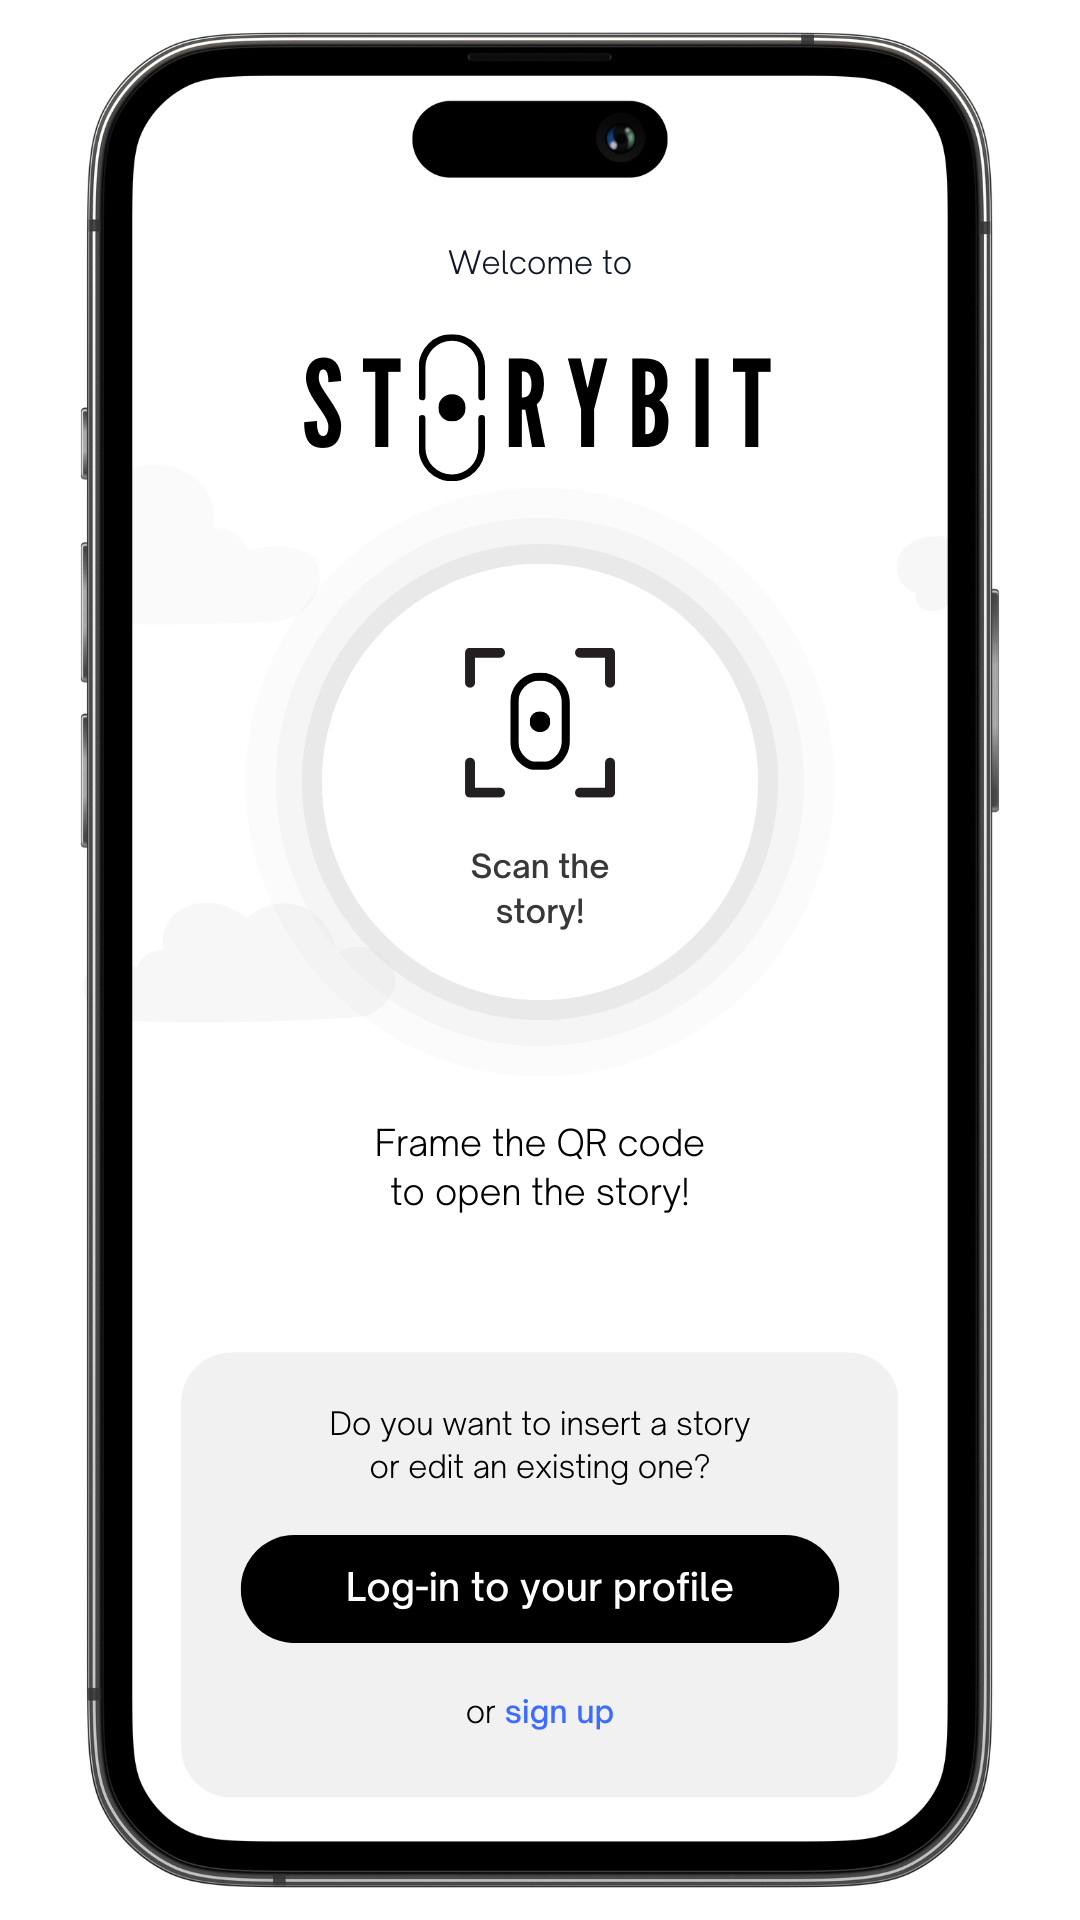 With storybit you can